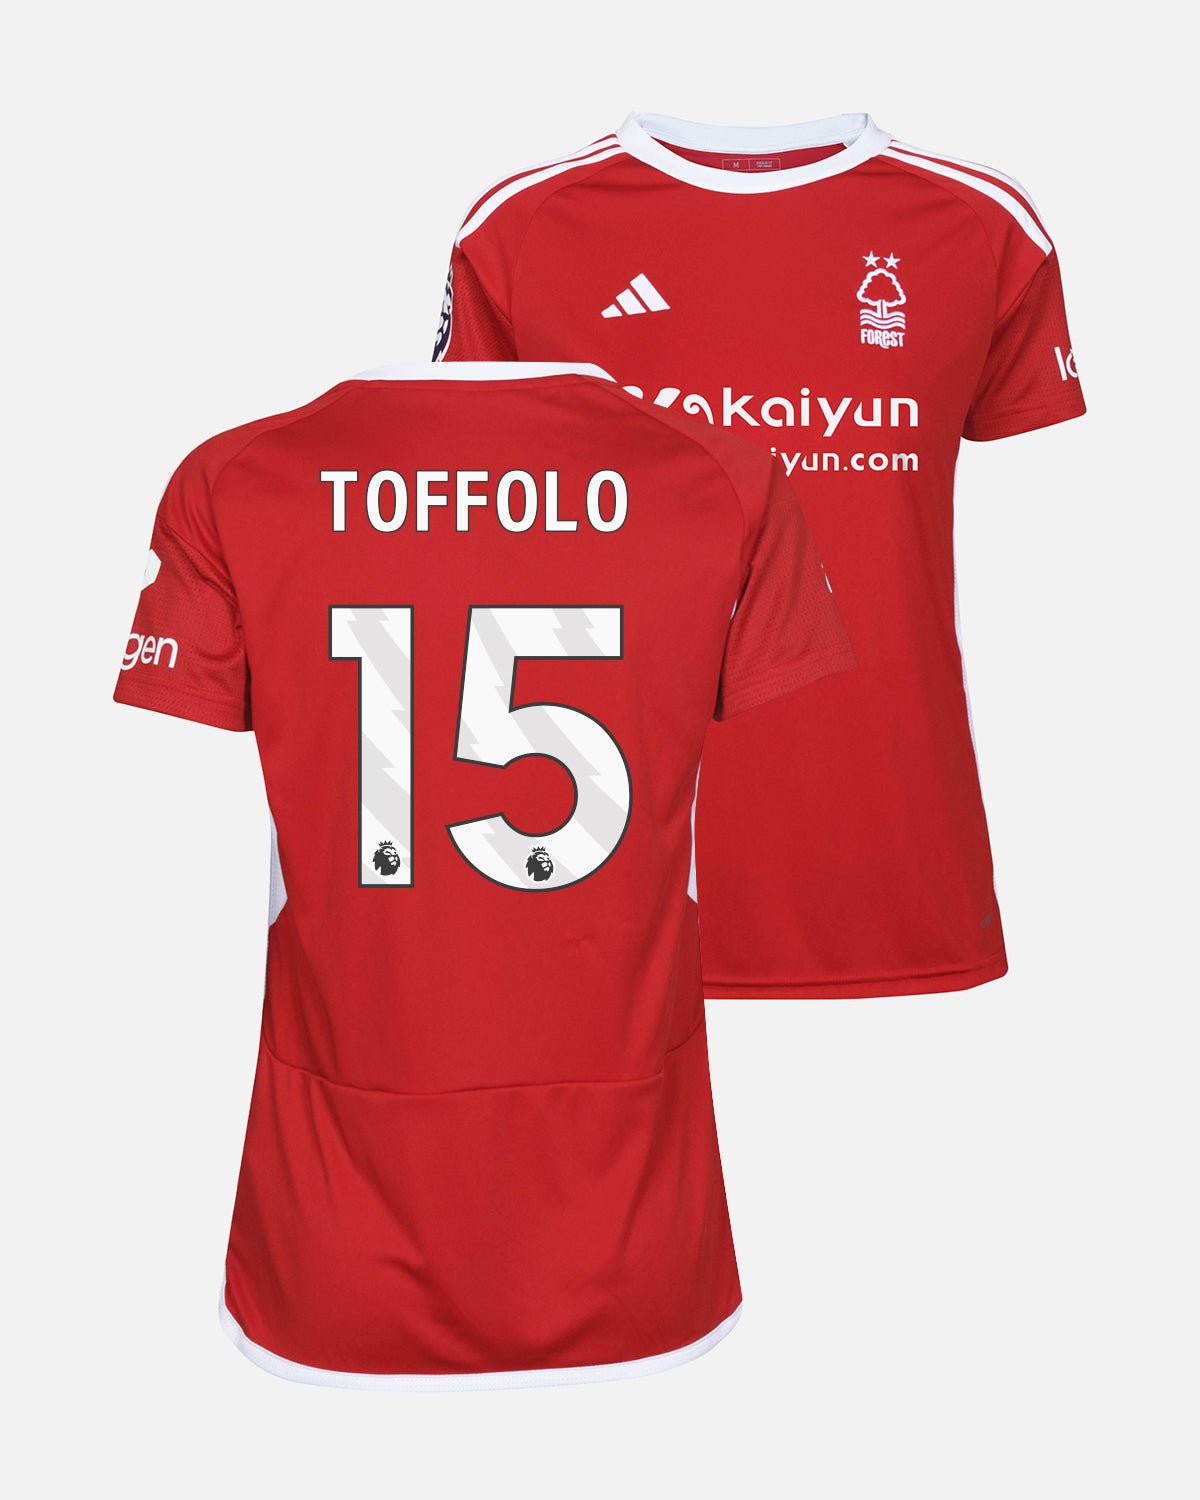 NFFC Women's Home Shirt 23-24 - Toffolo 15 - Nottingham Forest FC